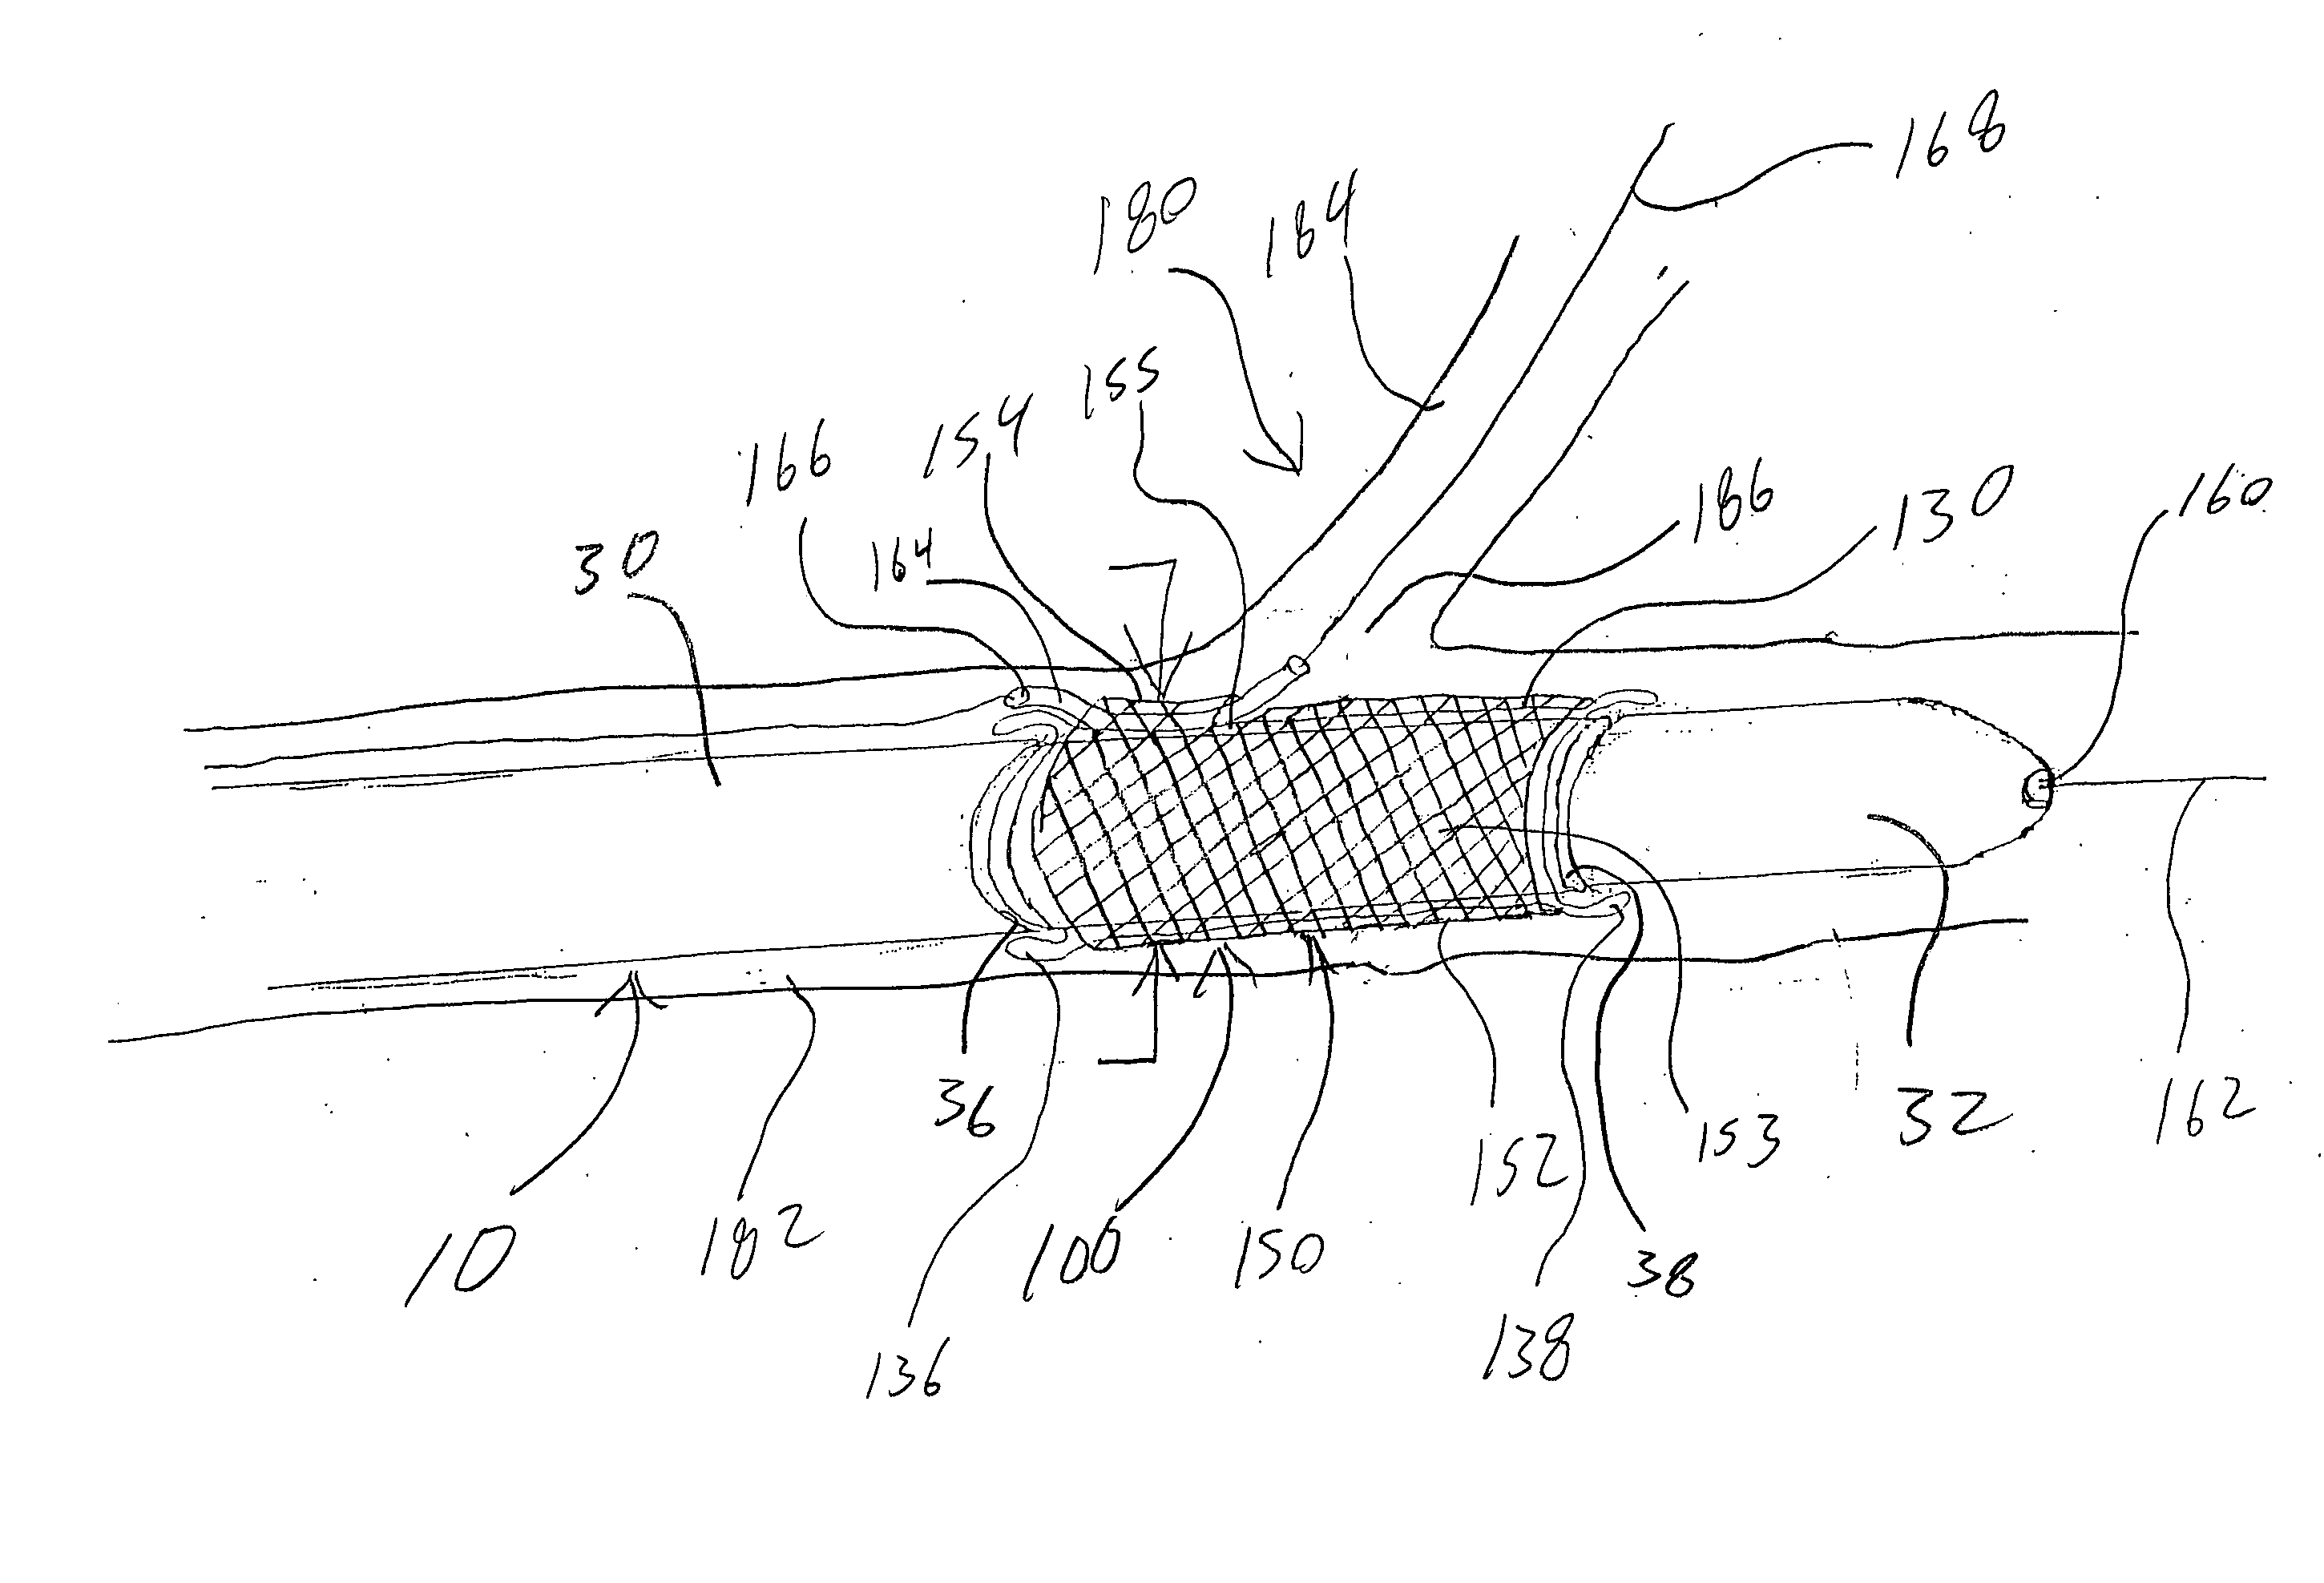 Rotating stent delivery system for side branch access and protection and method of using same